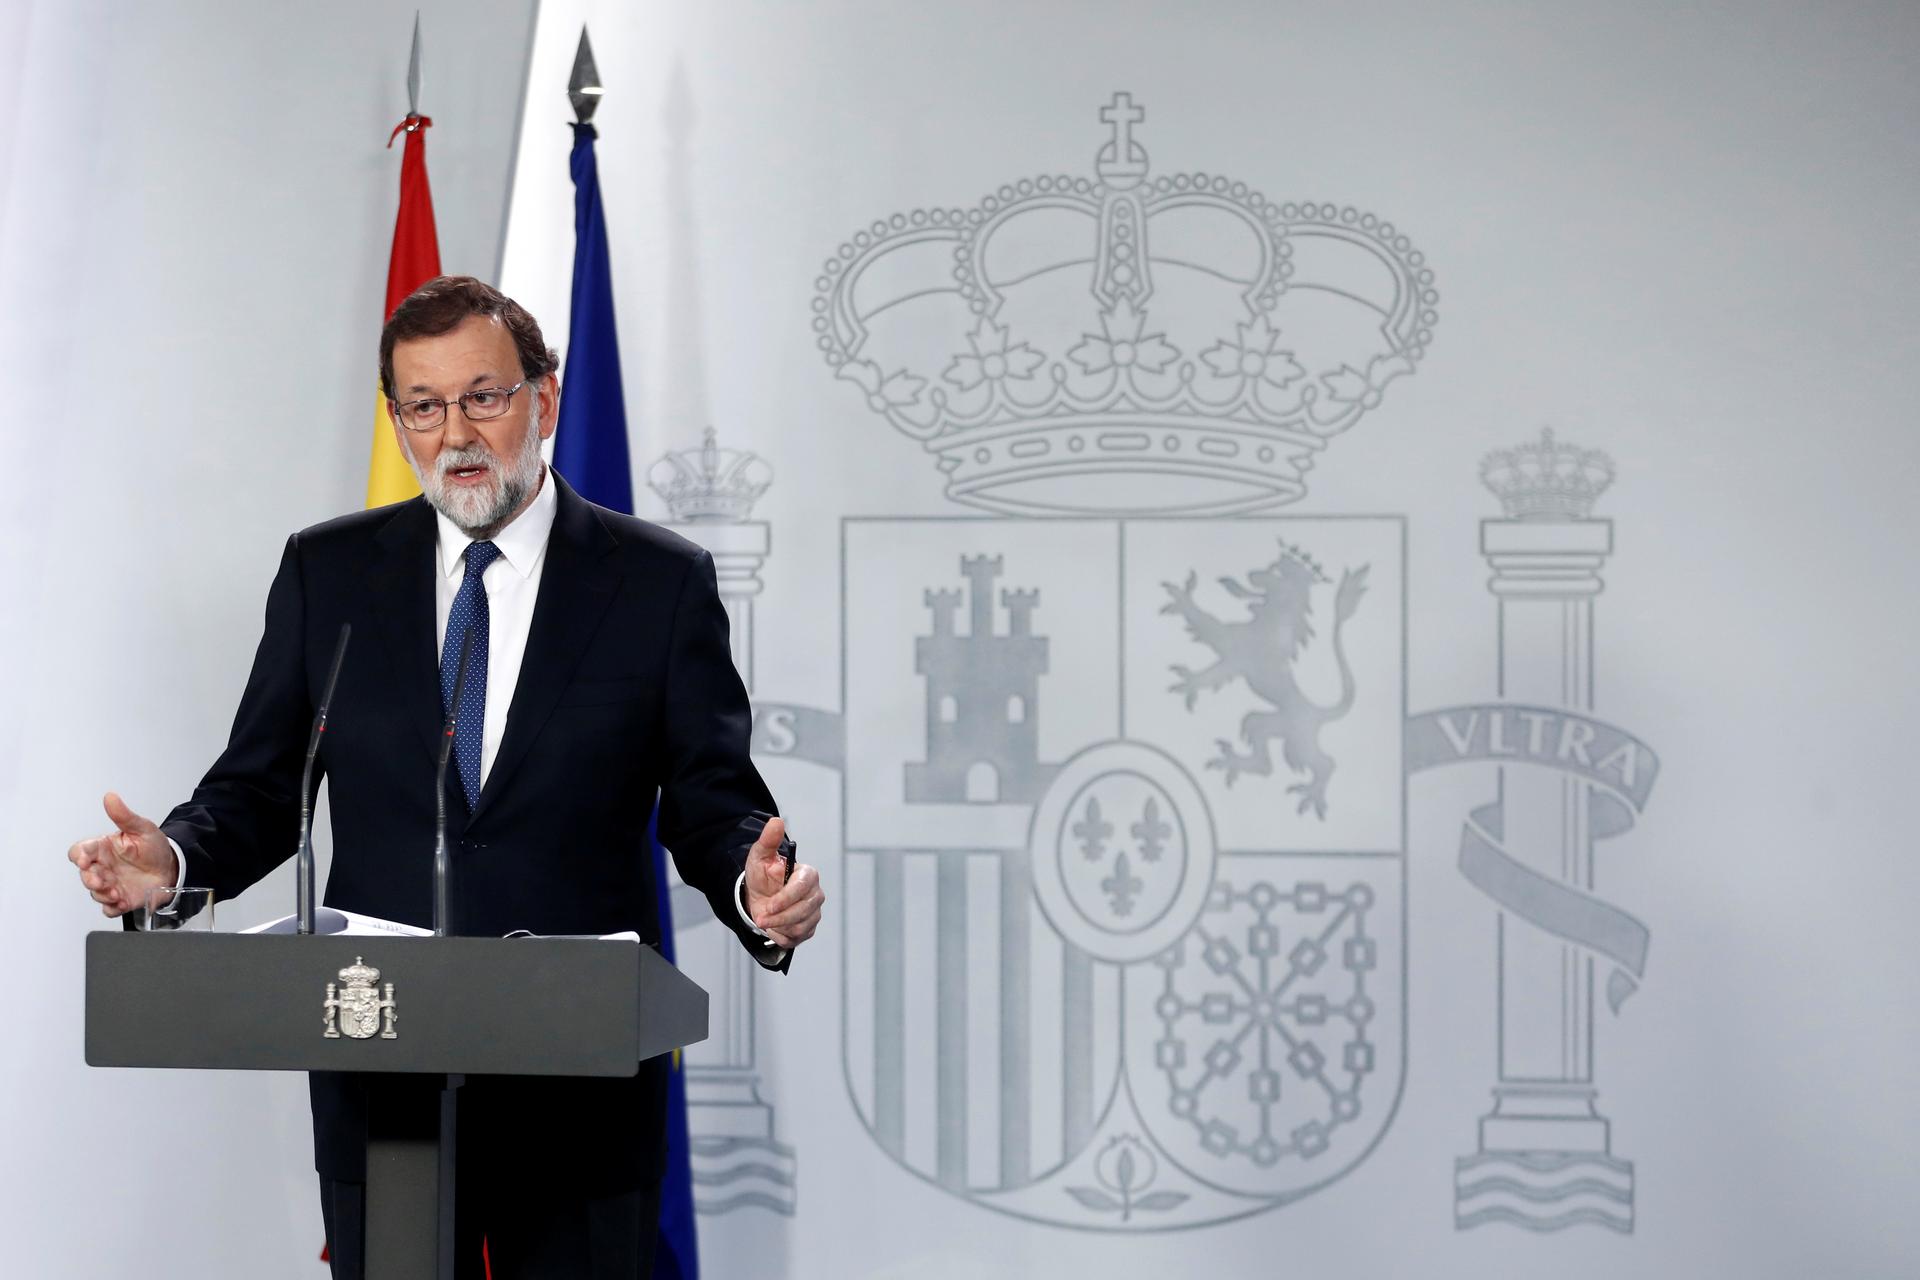 Spain's Prime Minister Mariano Rajoy speaks during a press conference in Madrid